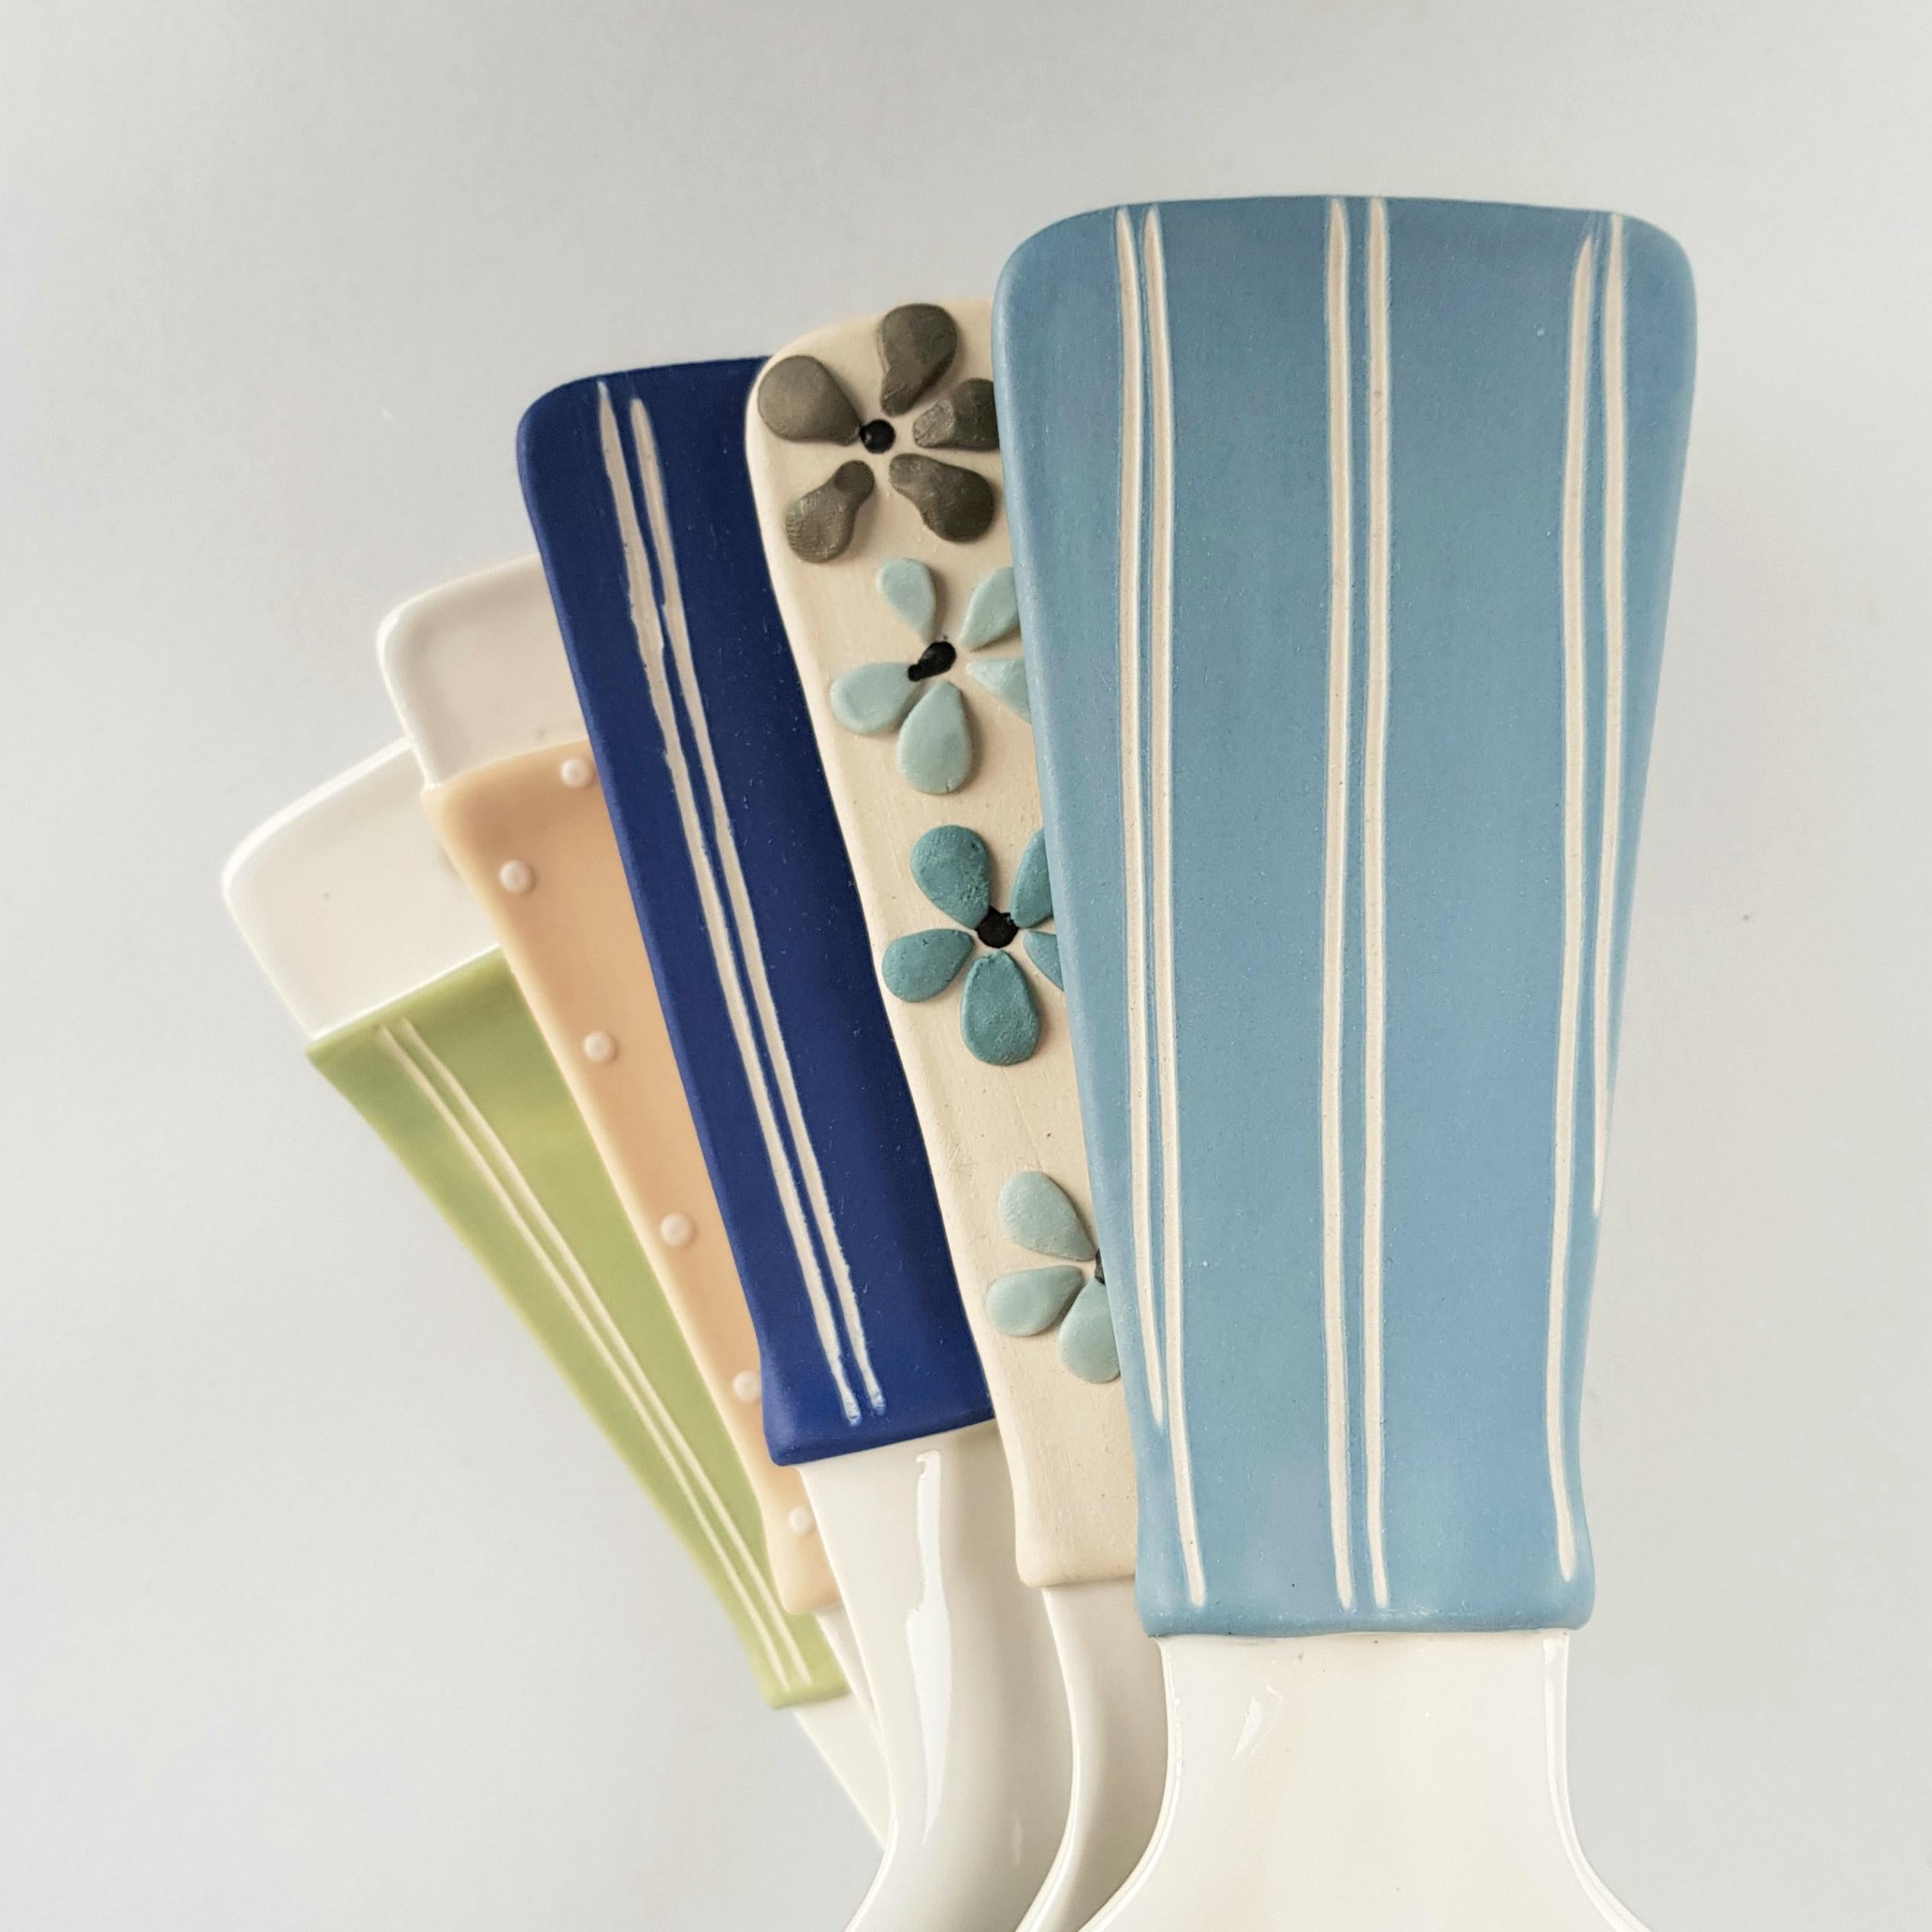 This wonderful collection encourages to participate in the process of combining small pleasures into a significant whole by regarding details as both minute and essential. Our artist care a lot about details in her creations. 
All the ceramics are